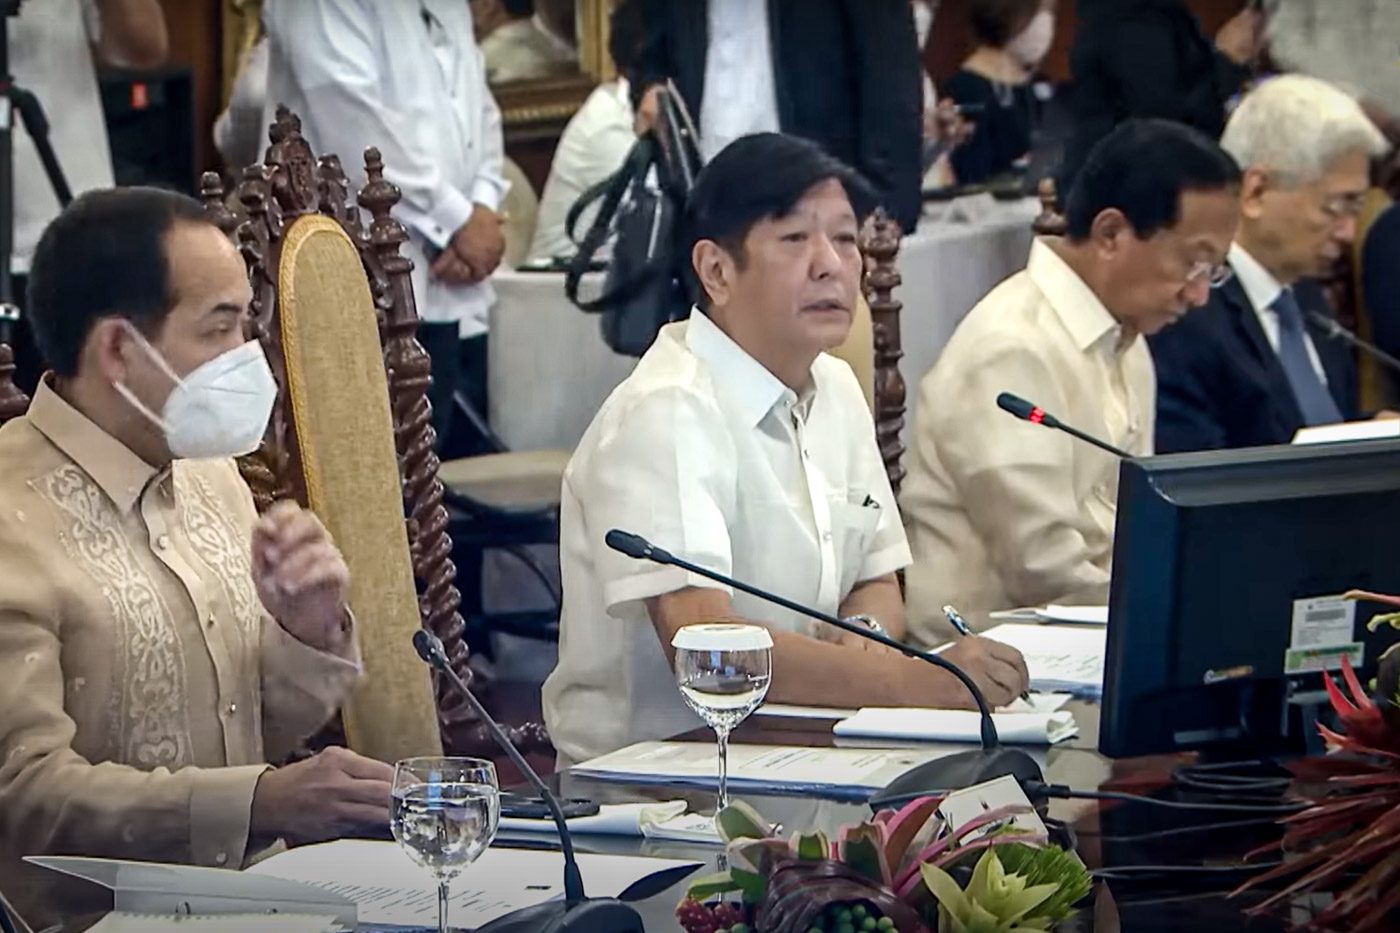 Amid backlash, Marcos says blended learning can continue in ‘very specific areas’